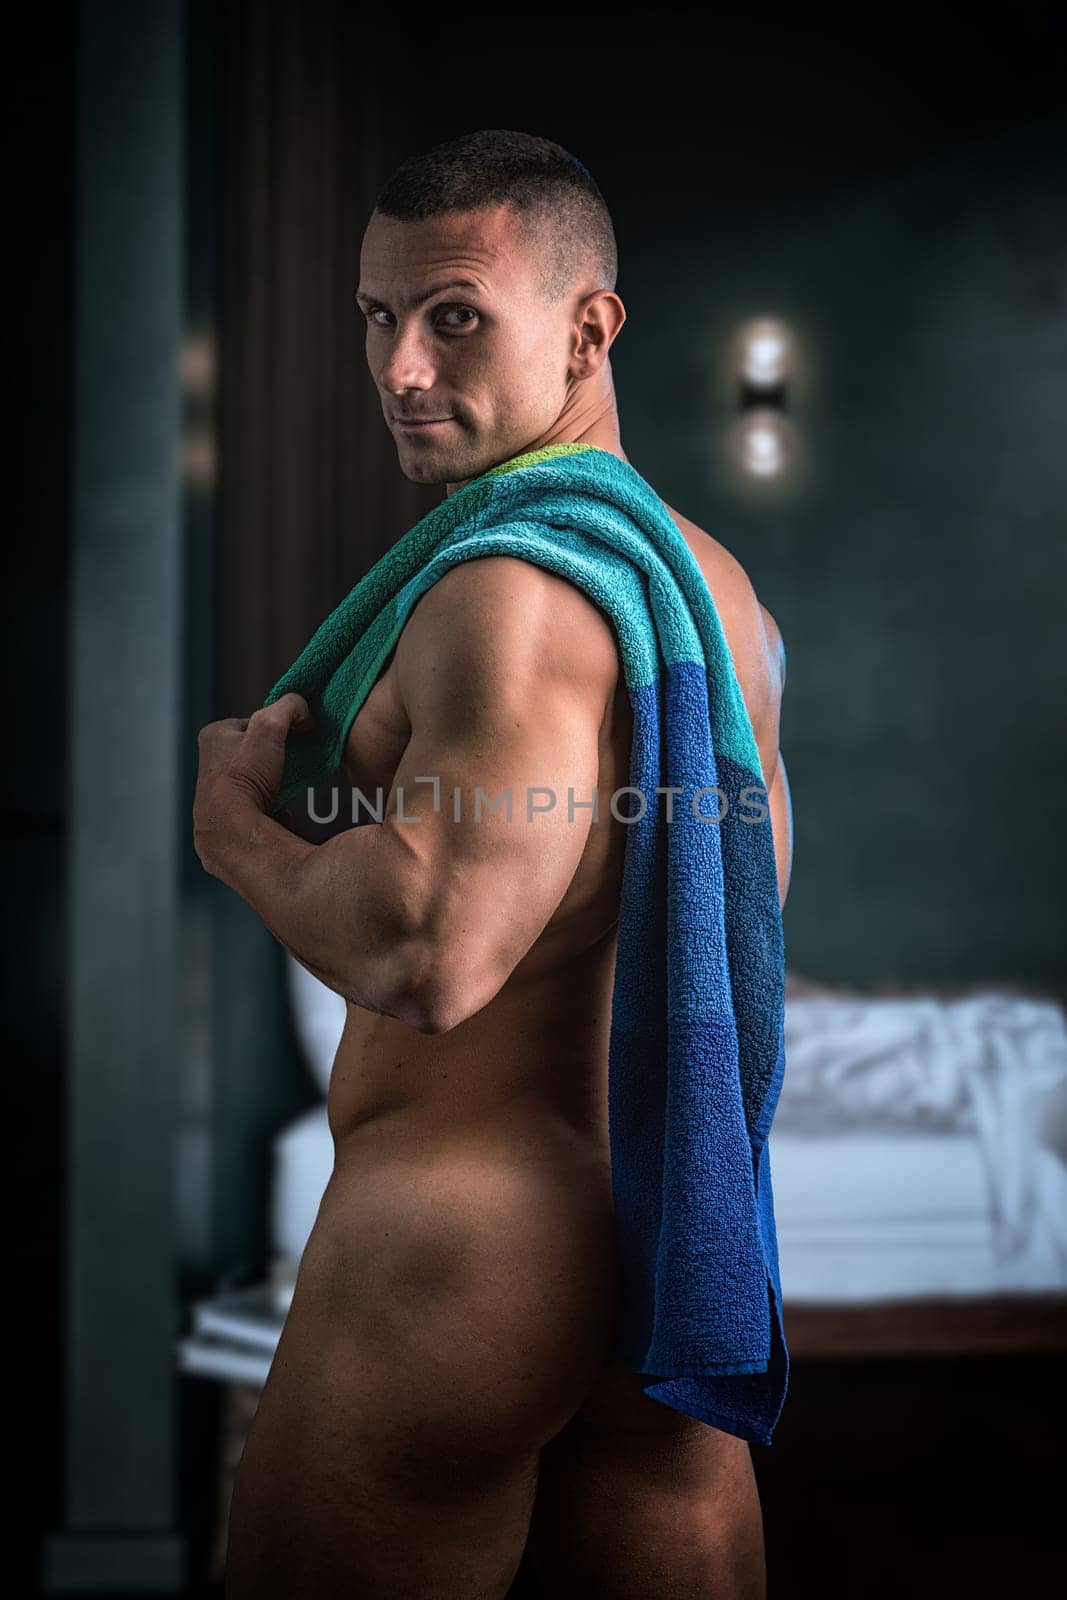 Completely naked handsome muscular man looking at camera in bedroom after shower